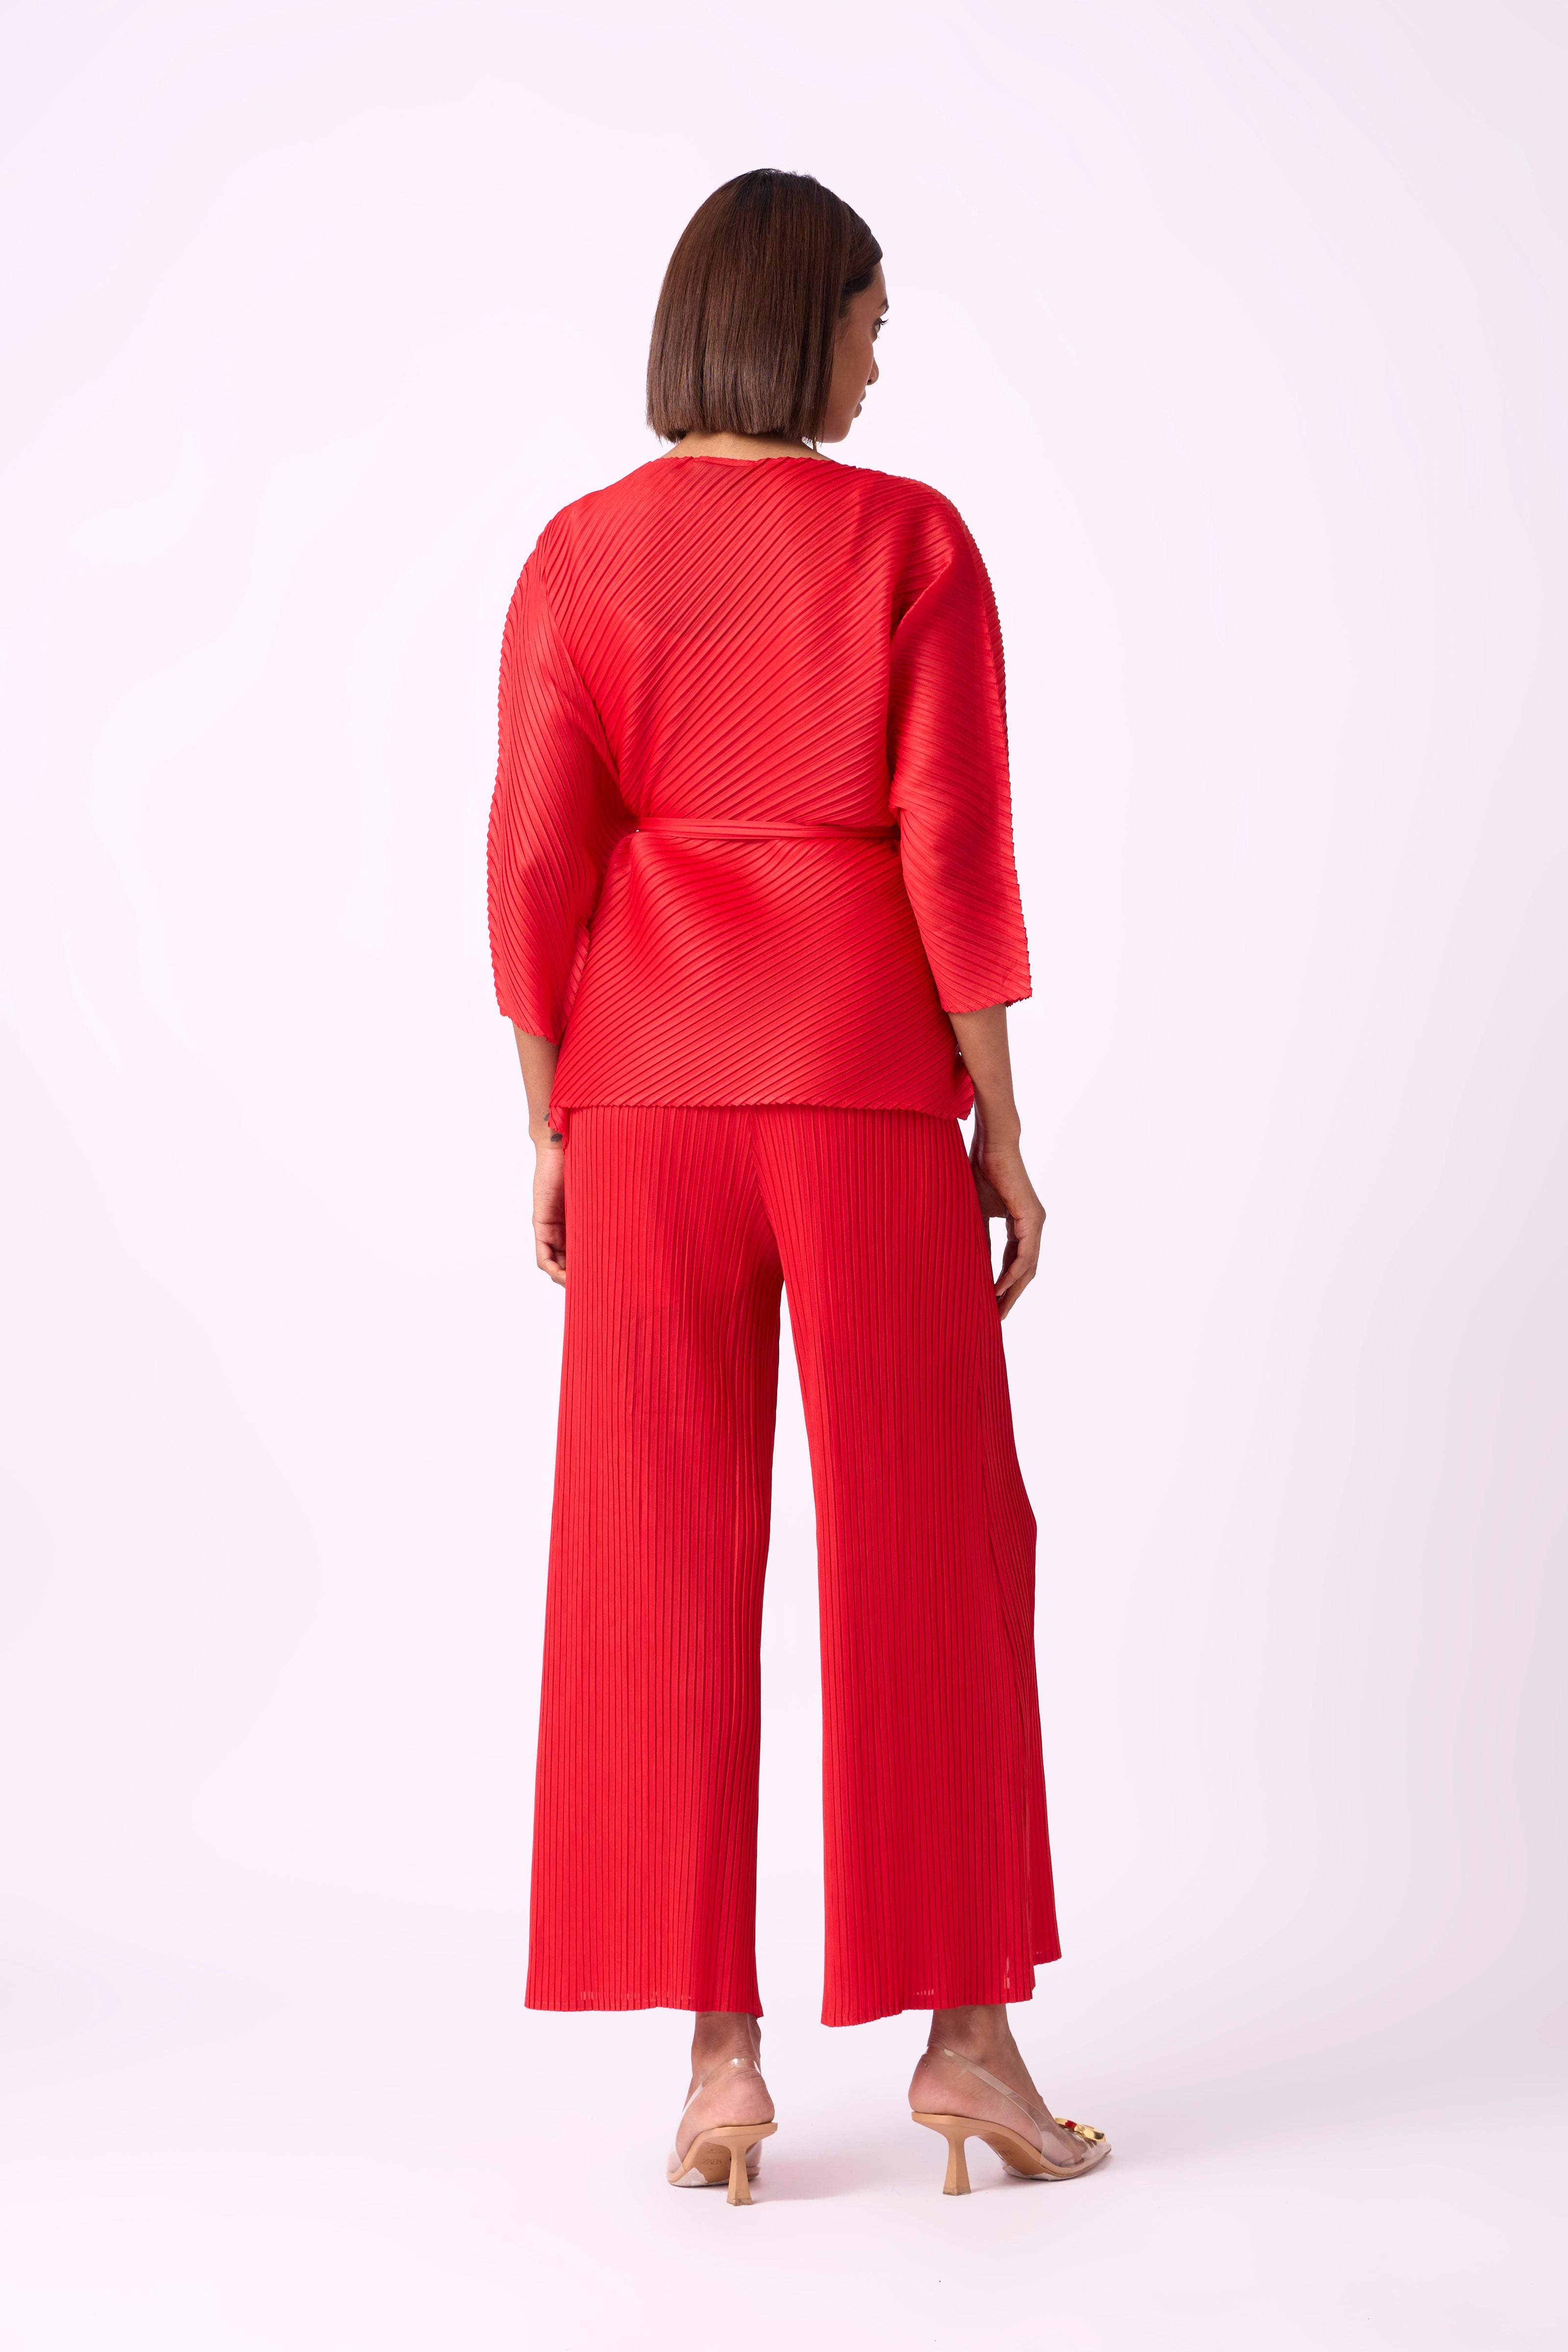 Cora Co-ord Set - Red